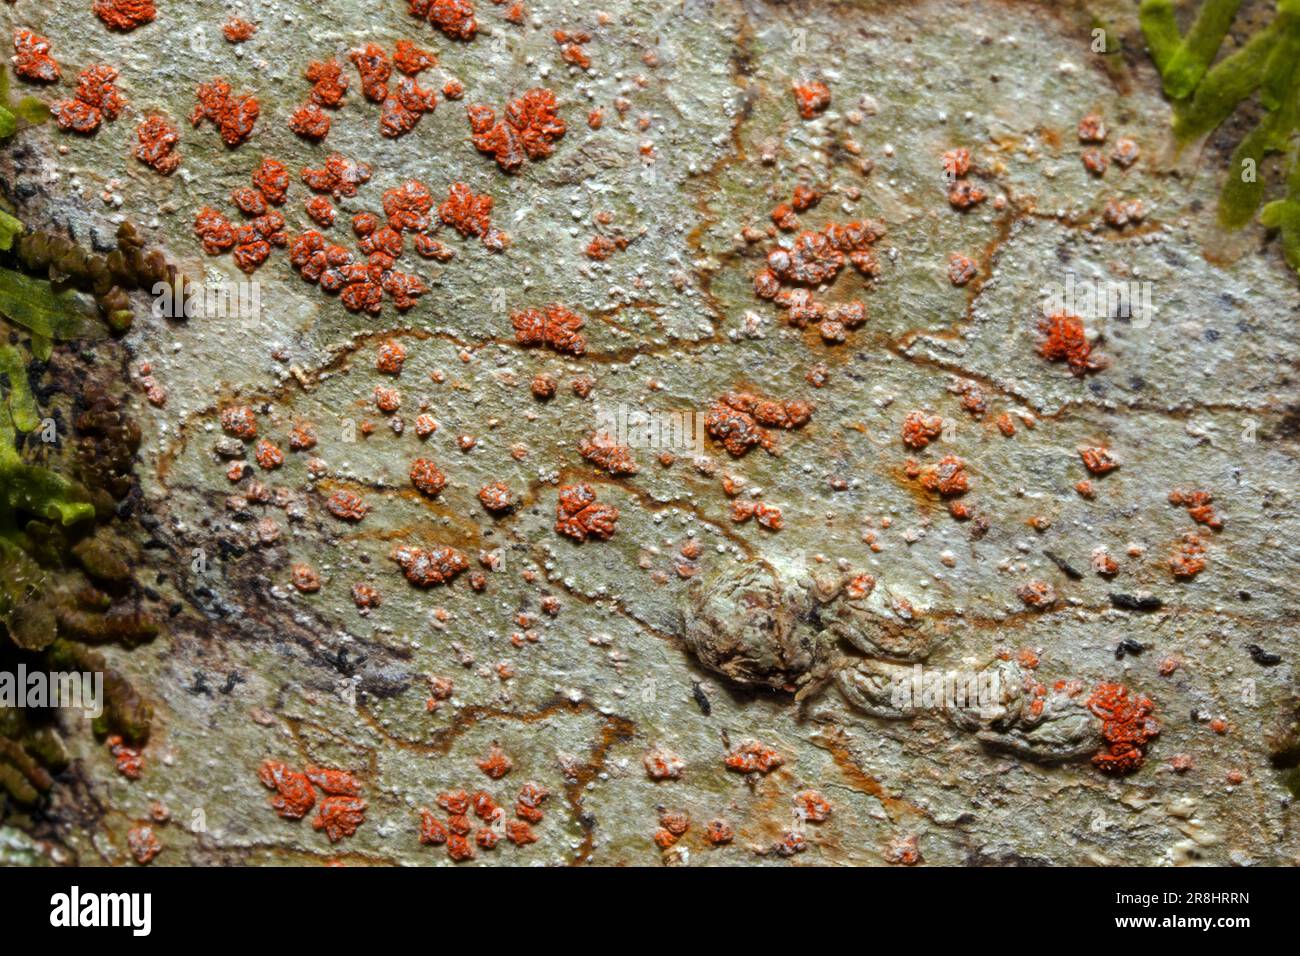 Coniocarpon cinnabarinum is a crustose lichen found on shaded, smooth barked trees. It has a global distribution. Stock Photo